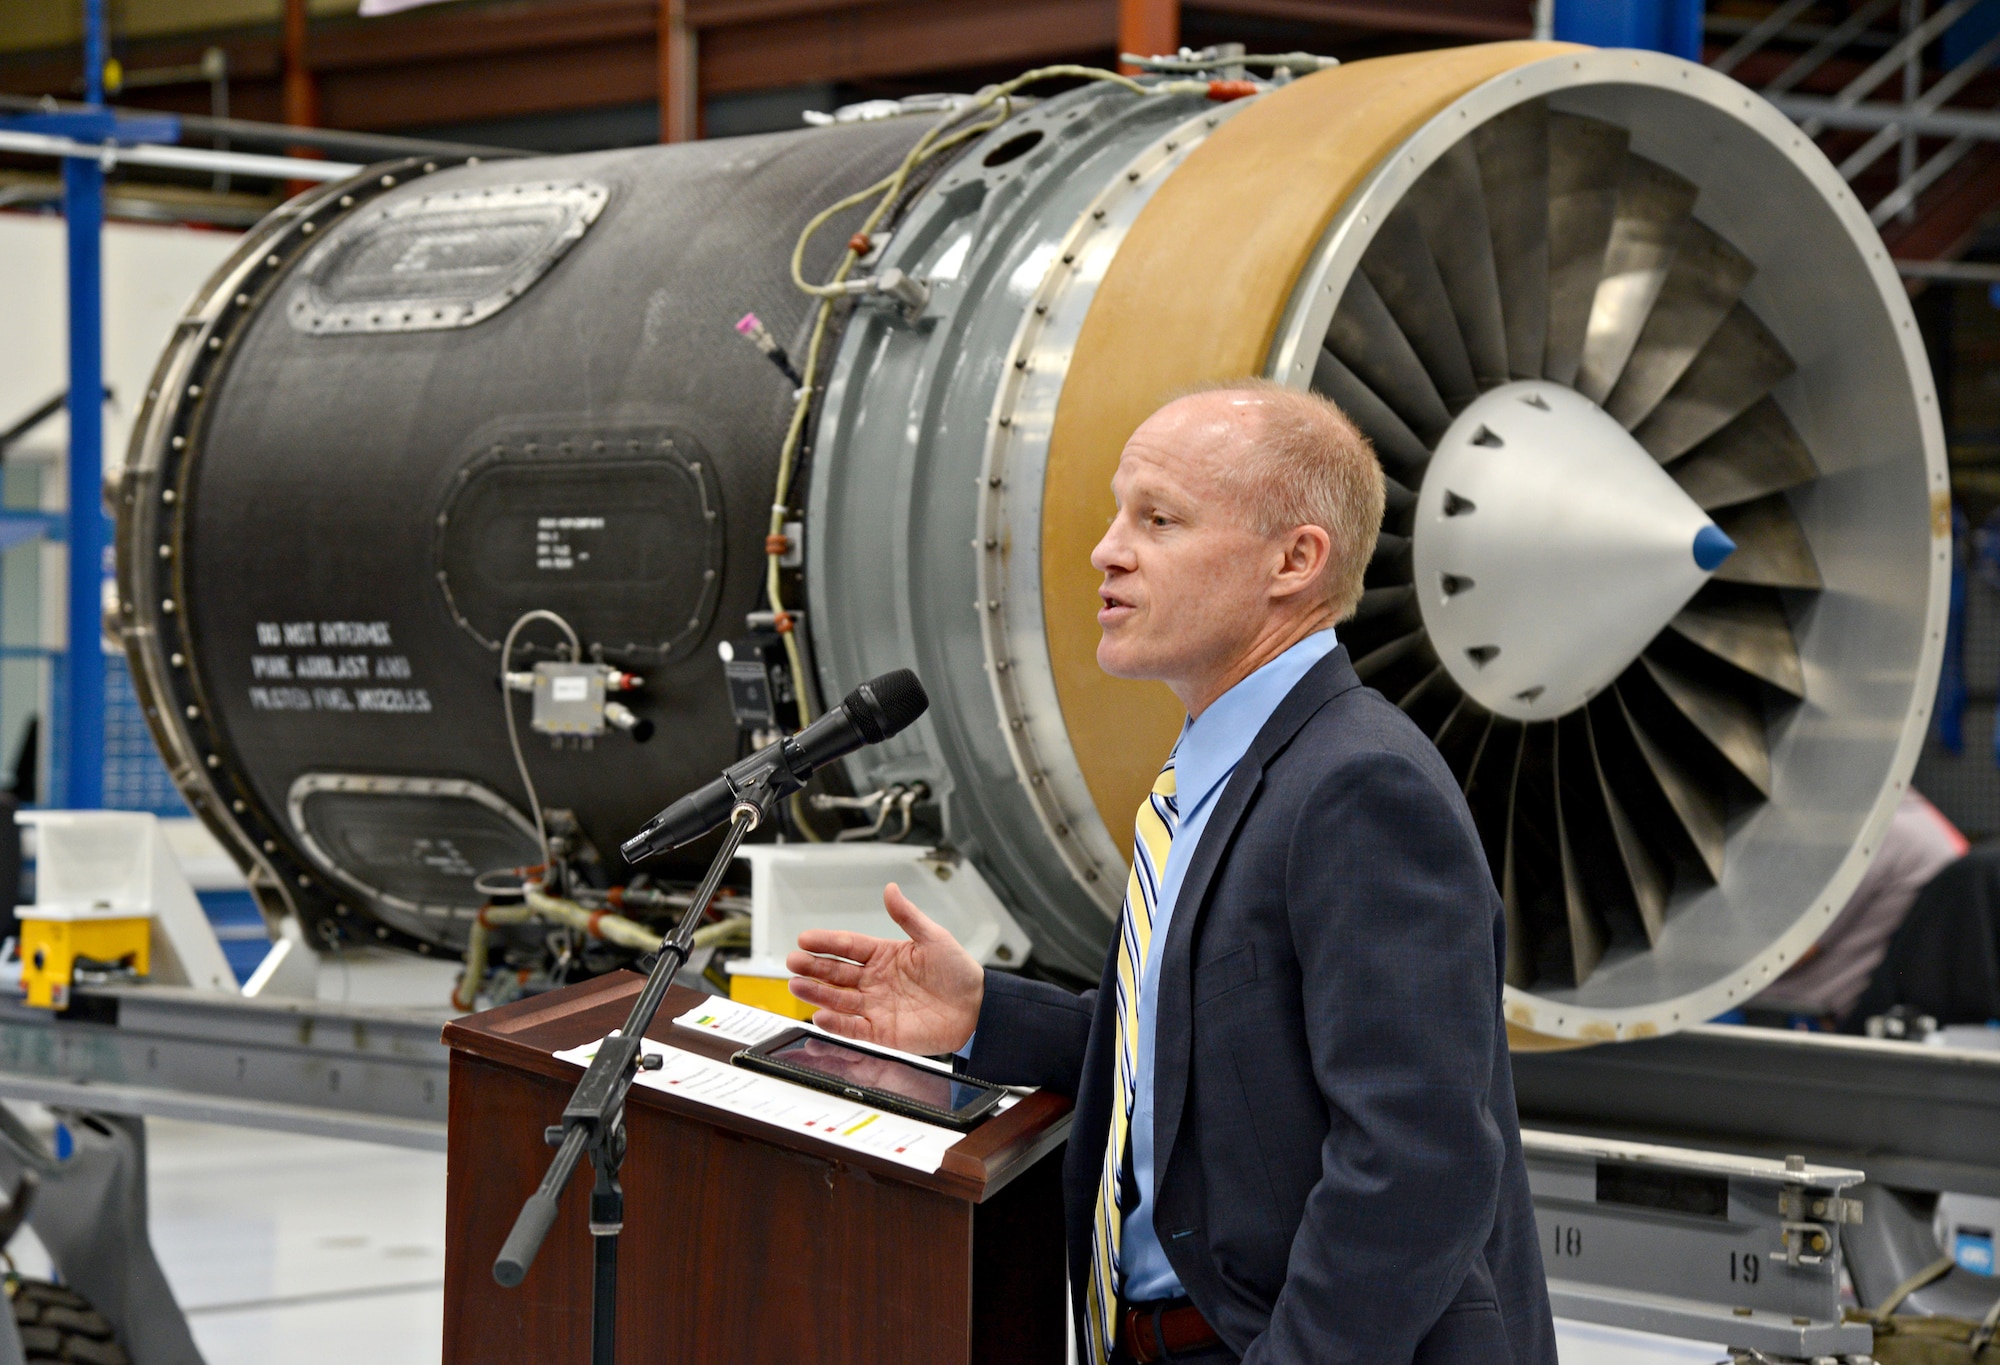 Phil Burkholder, president of Defense North America, Rolls-Royce, speaks on behalf of his company during the ribbon cutting ceremony for the new F137 engine maintenance line in Bldg. 3221. (Air Force photo by Kelly White)